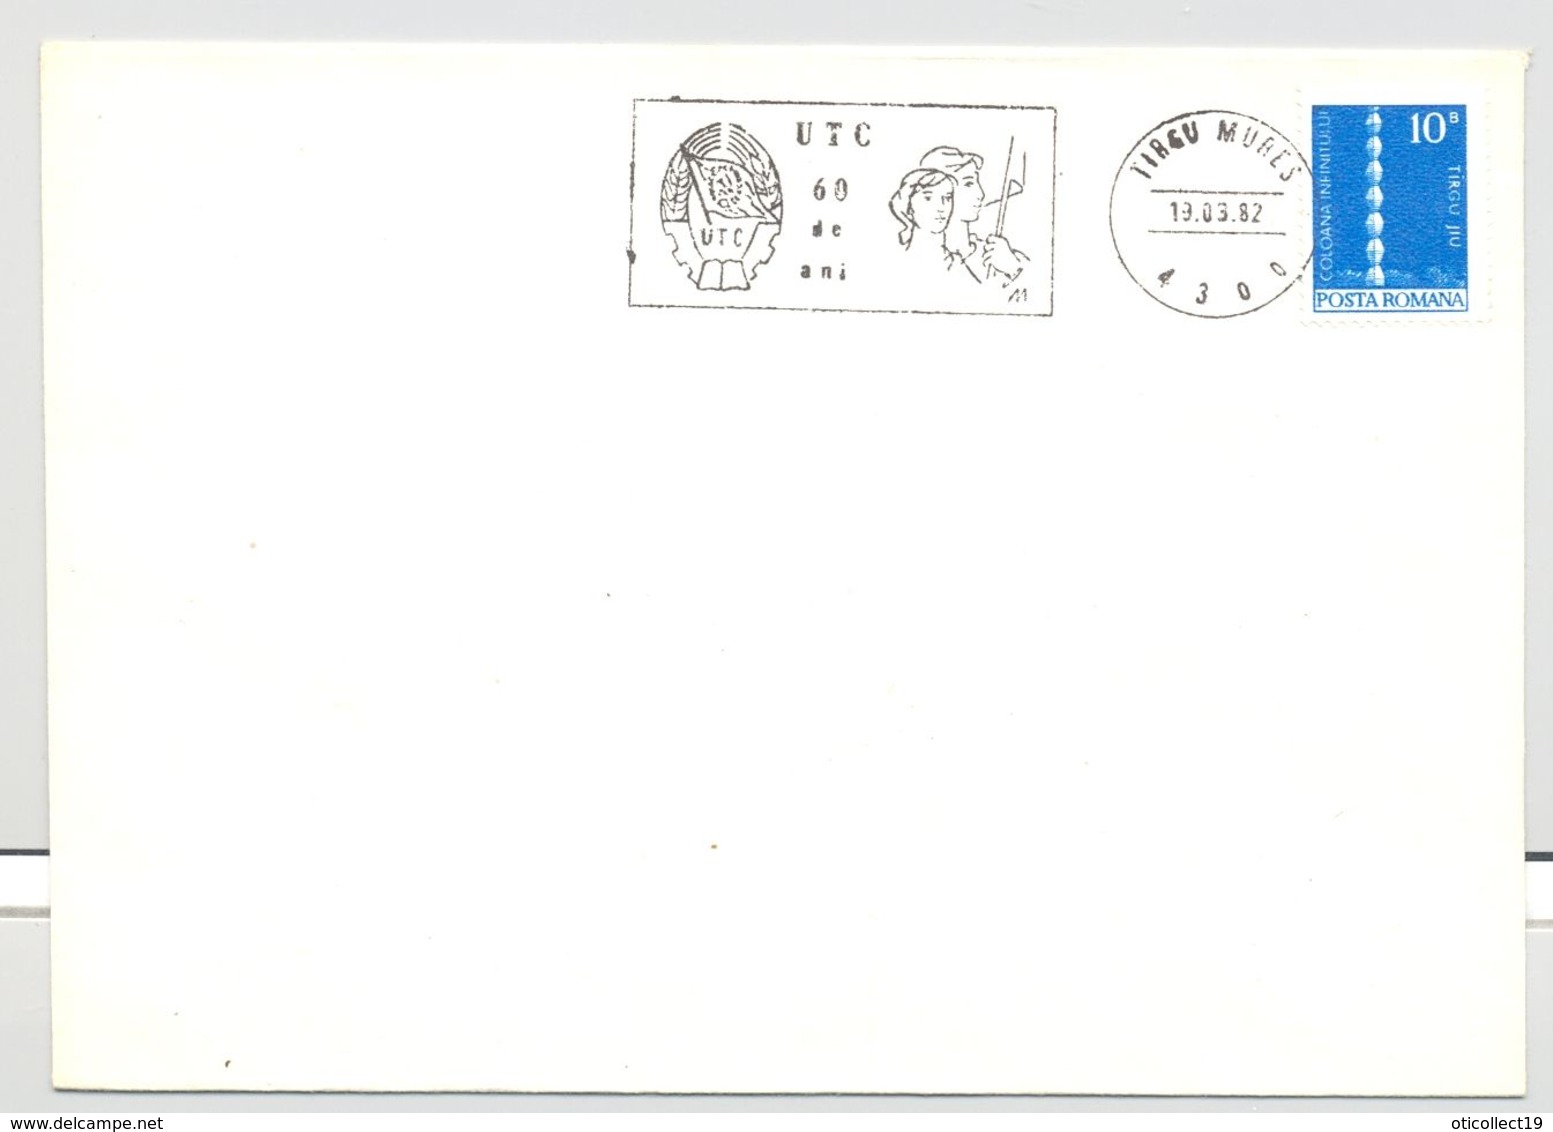 ROMANIAN YOUTH COMMUNIST ORGANIZATION ANNIVERSARY, SPECIAL POSTMARK ON COVER, ENDLESS COLUMN STAMP, 1982, ROMANIA - Briefe U. Dokumente